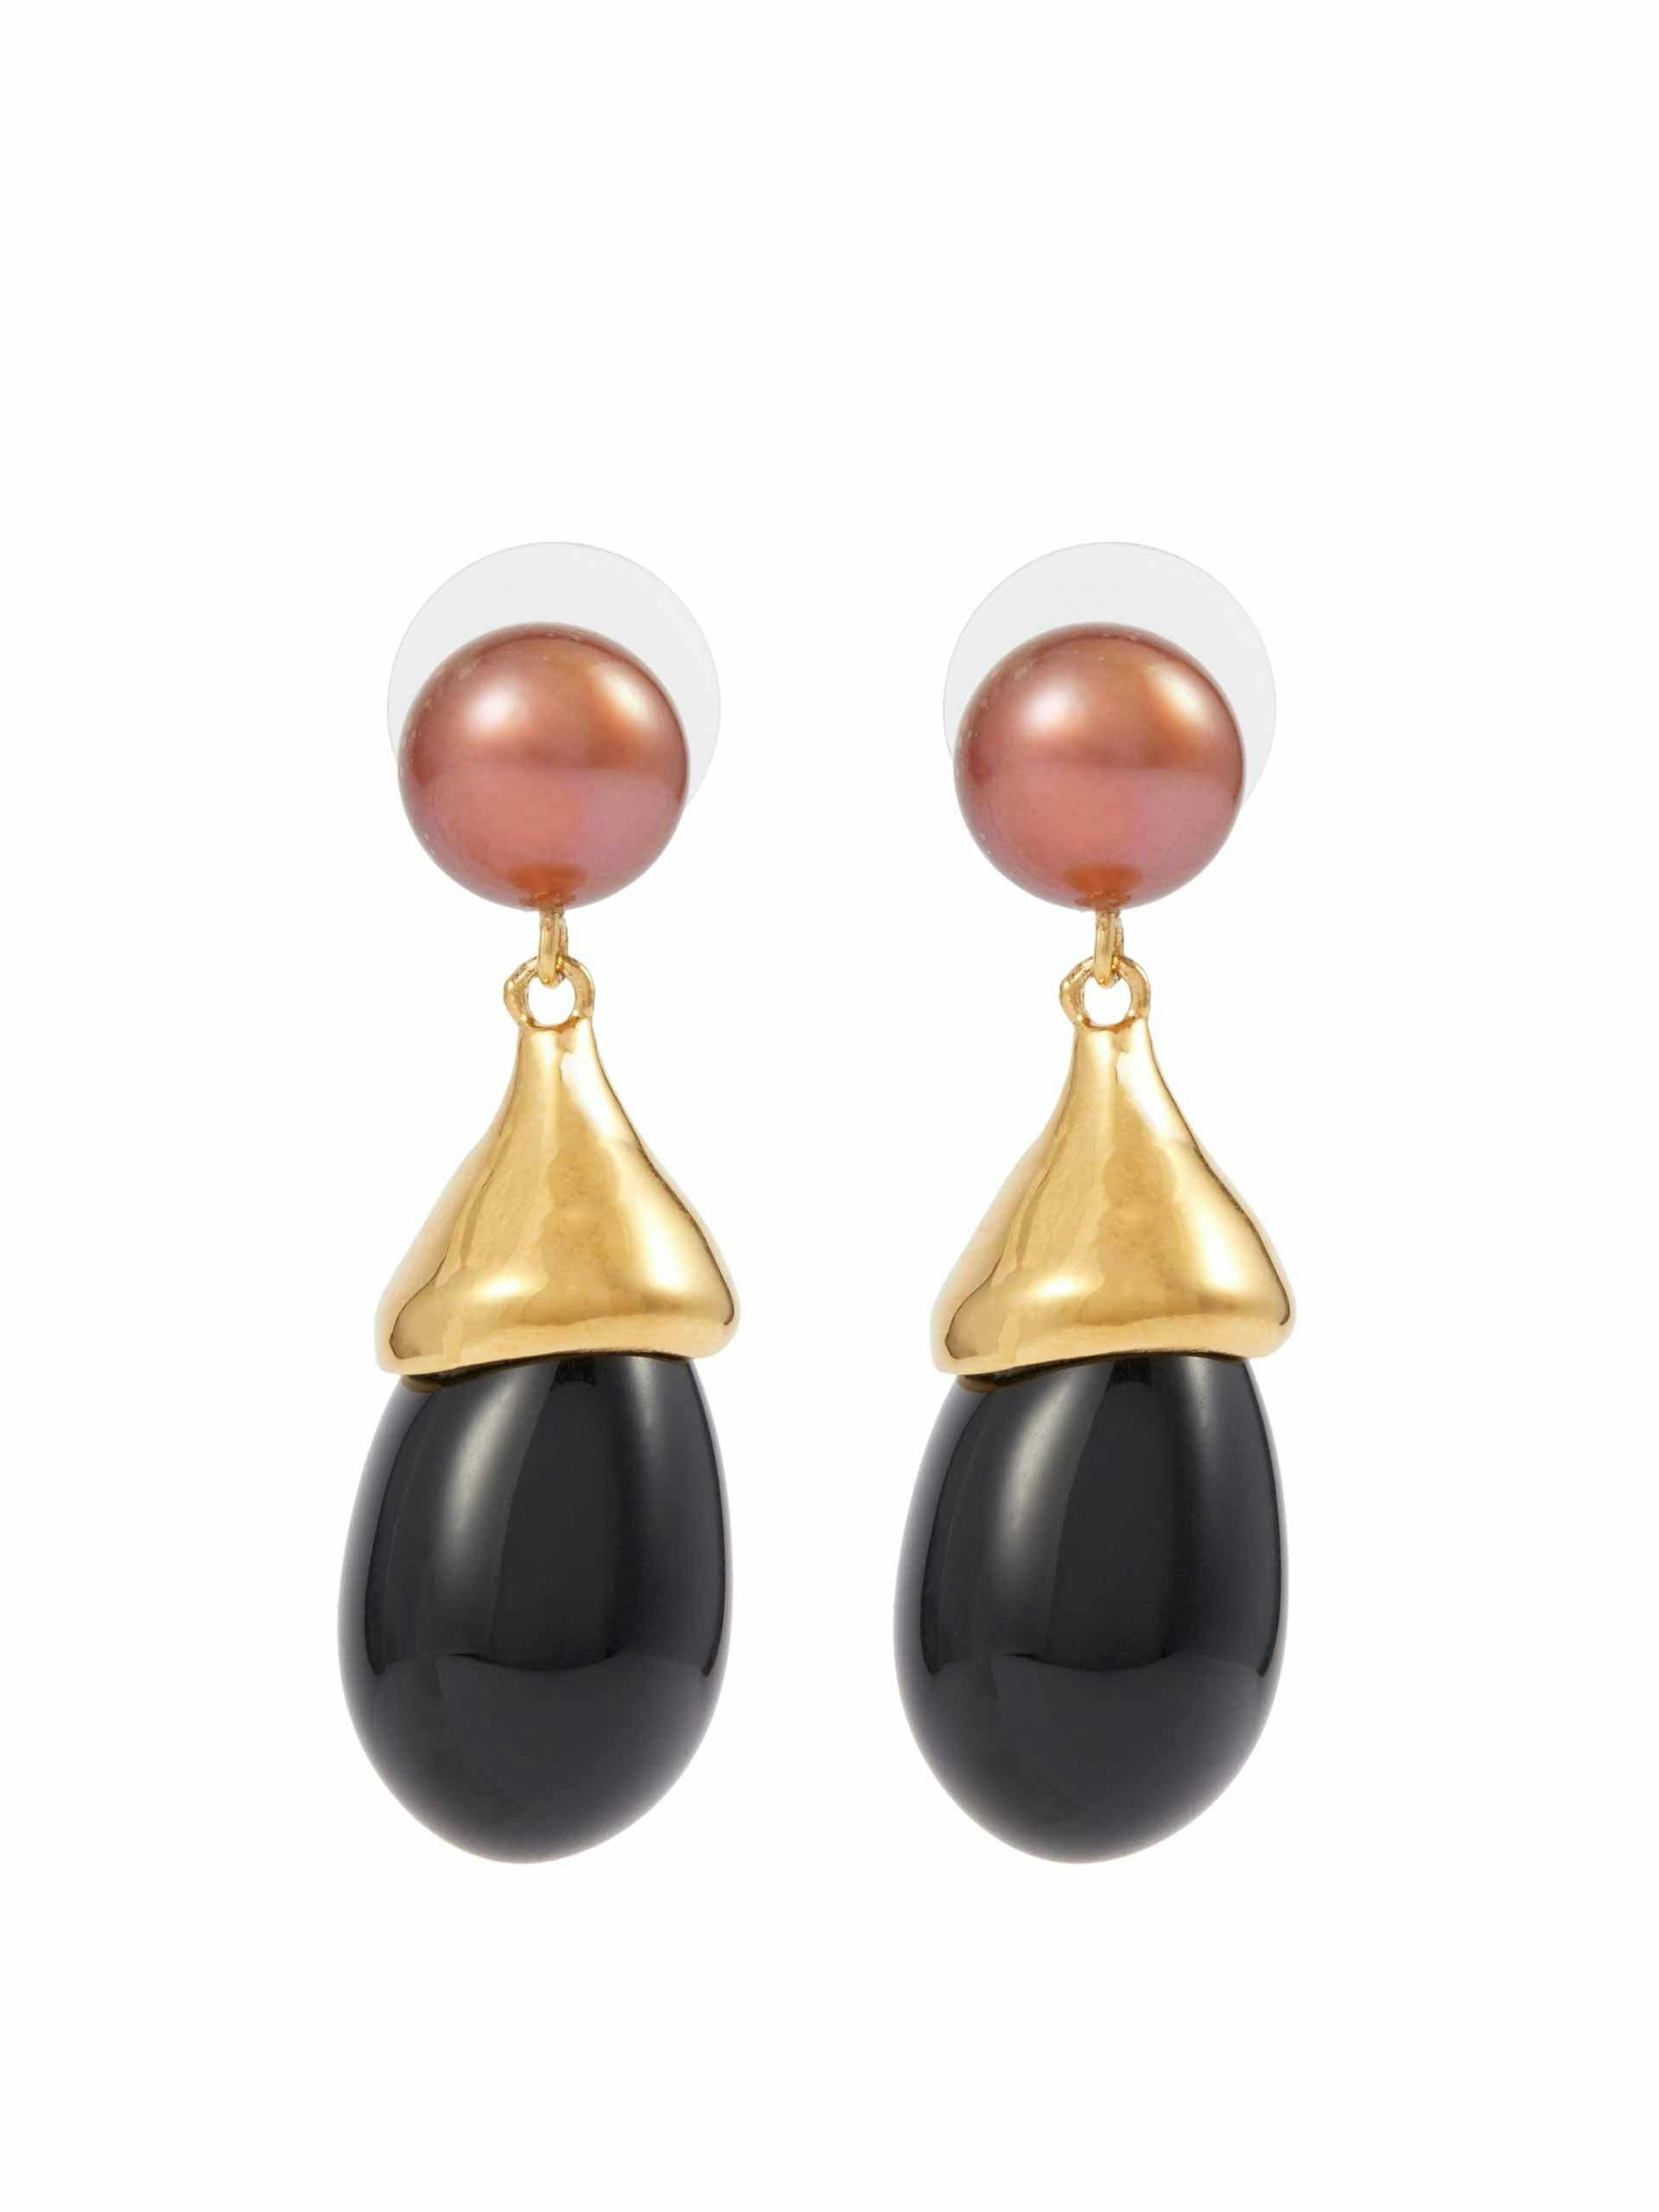 Audrey 18kt gold vermeil earrings with pearls